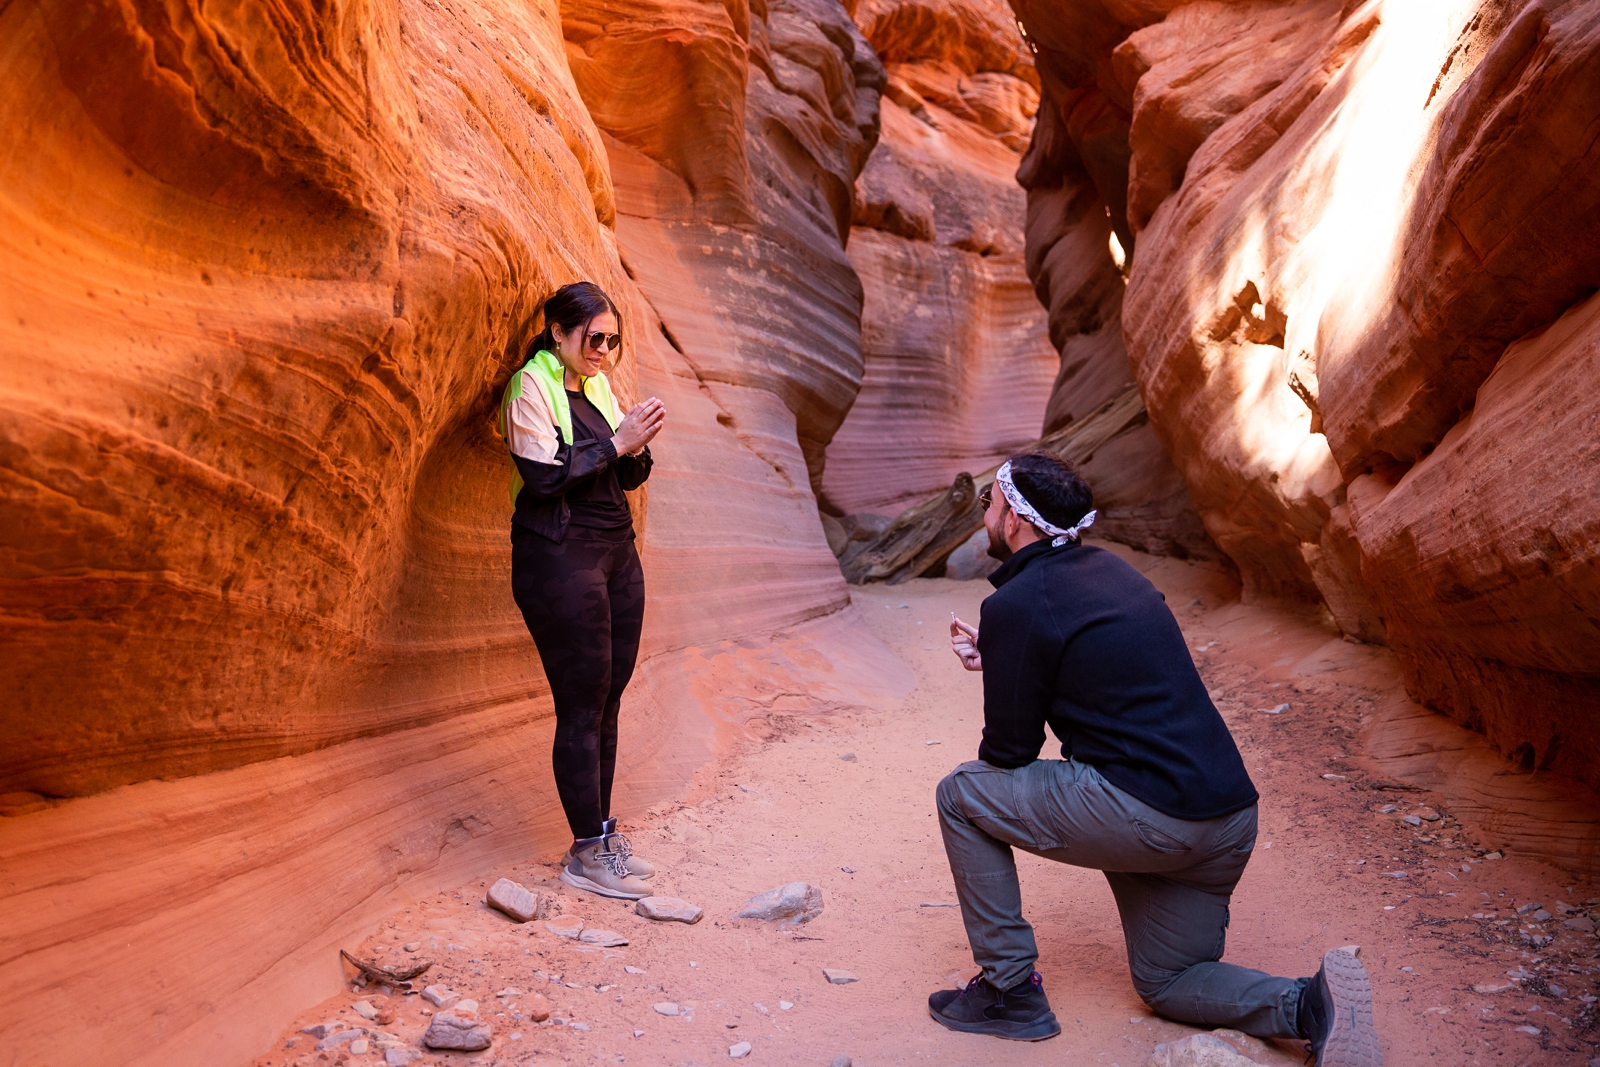 A guy down on his knee proposing to his shocked and surprised girlfriend in the middle of the Utah slot canyon during their adventurous hike